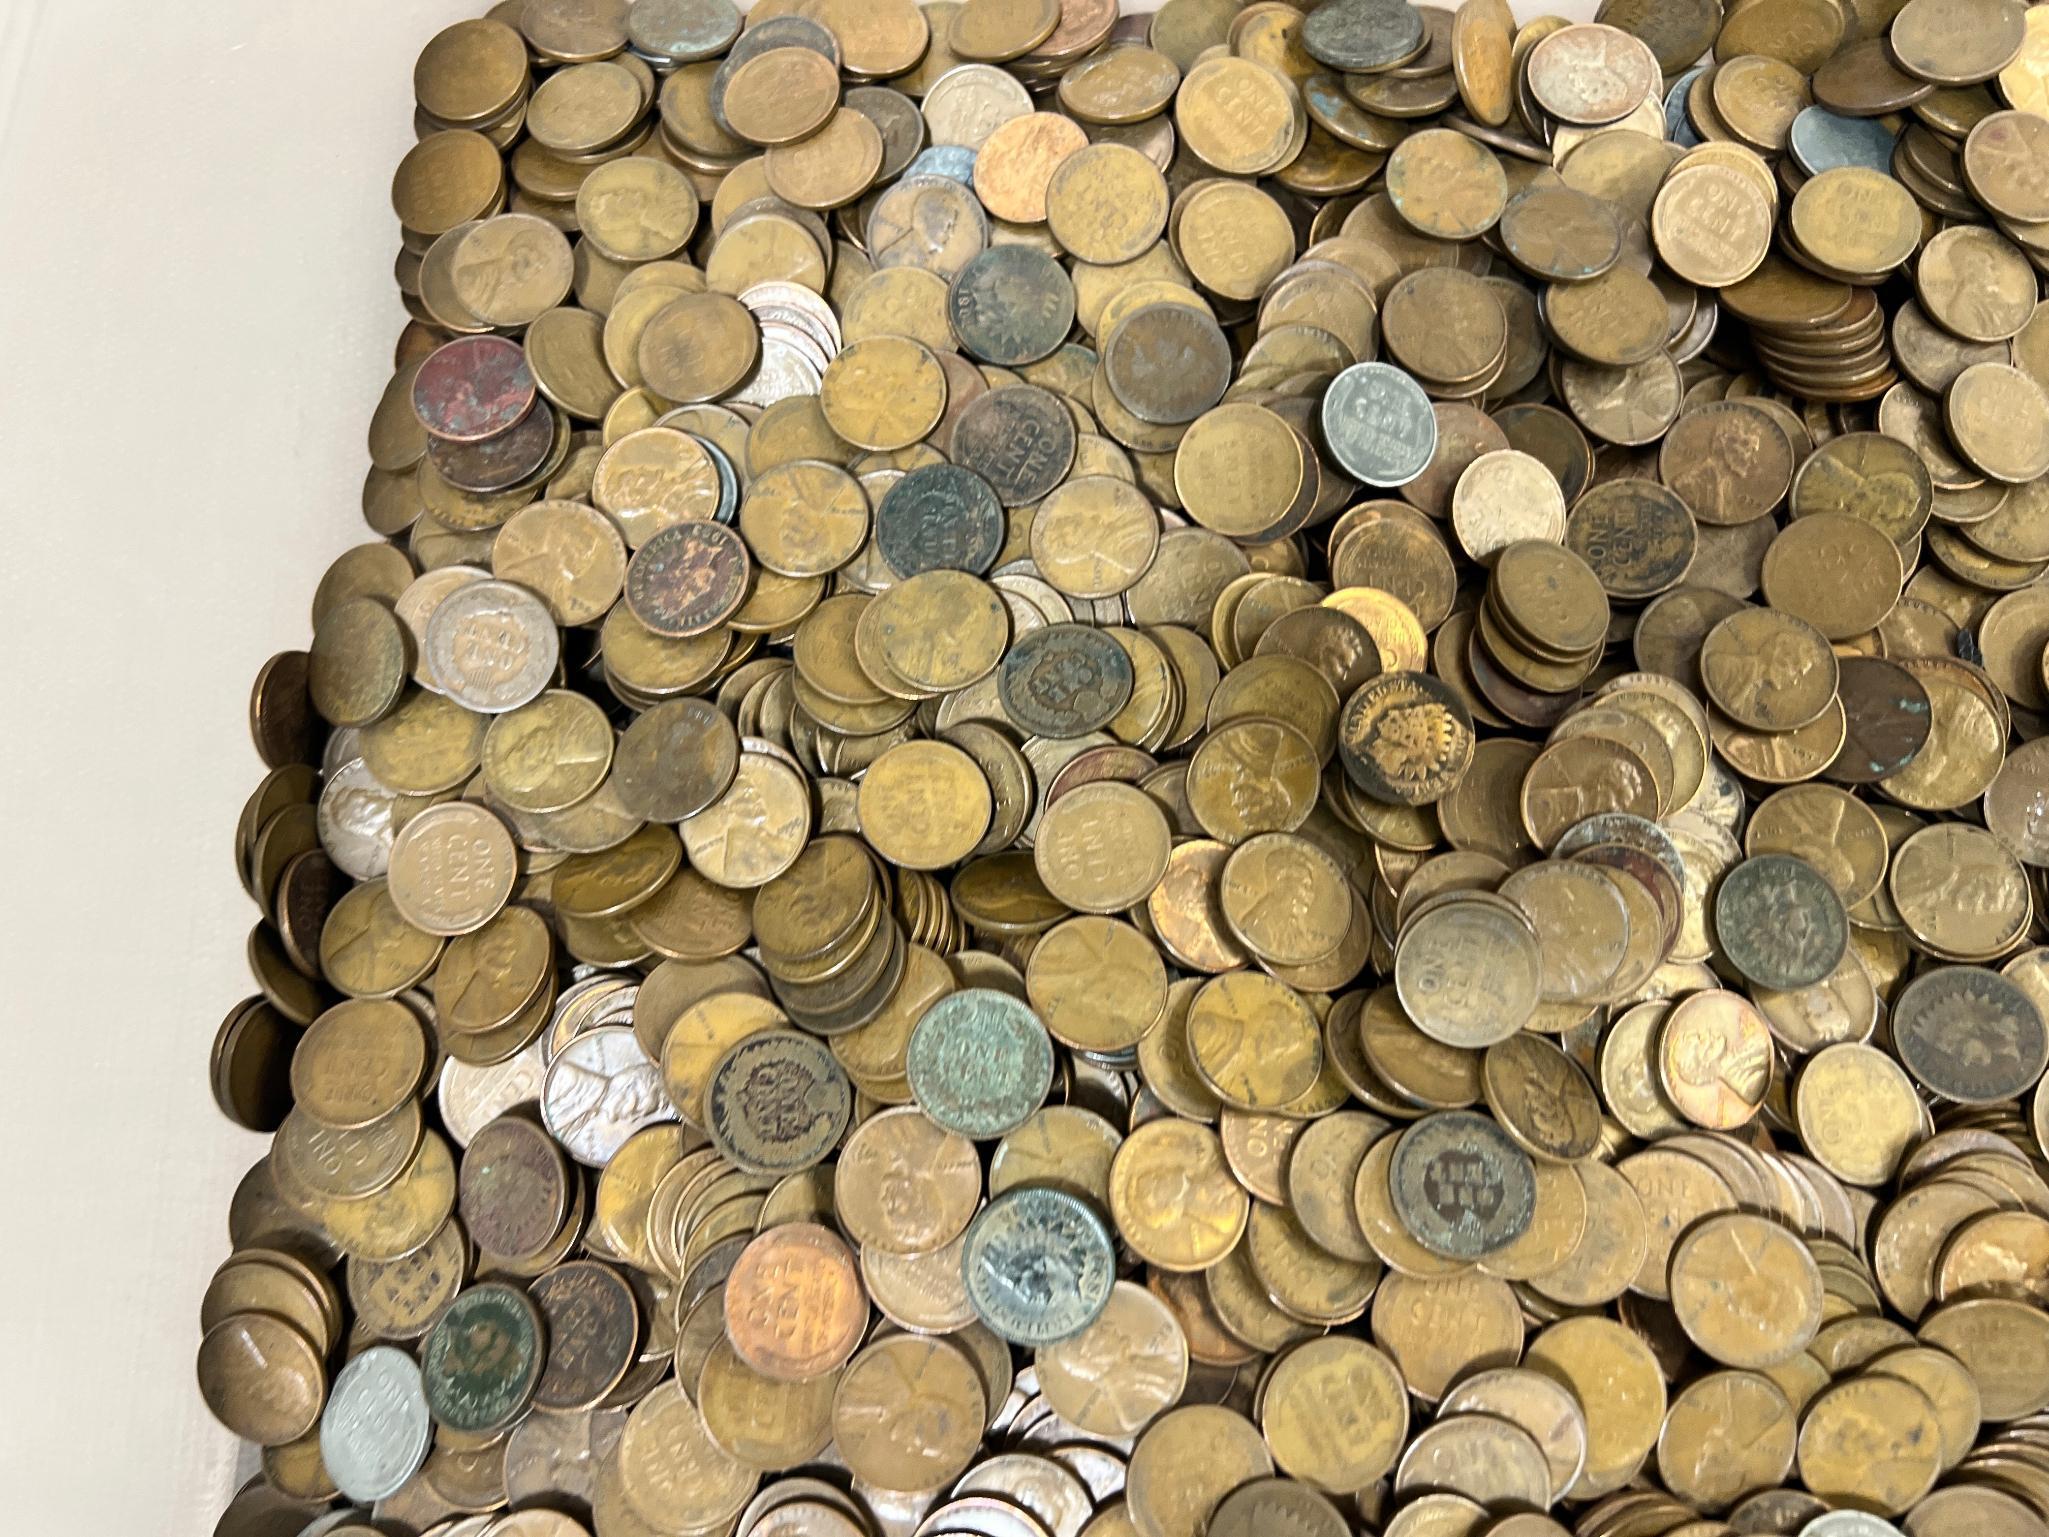 25+ pounds of Wheat cents w/ some Indianhead cents